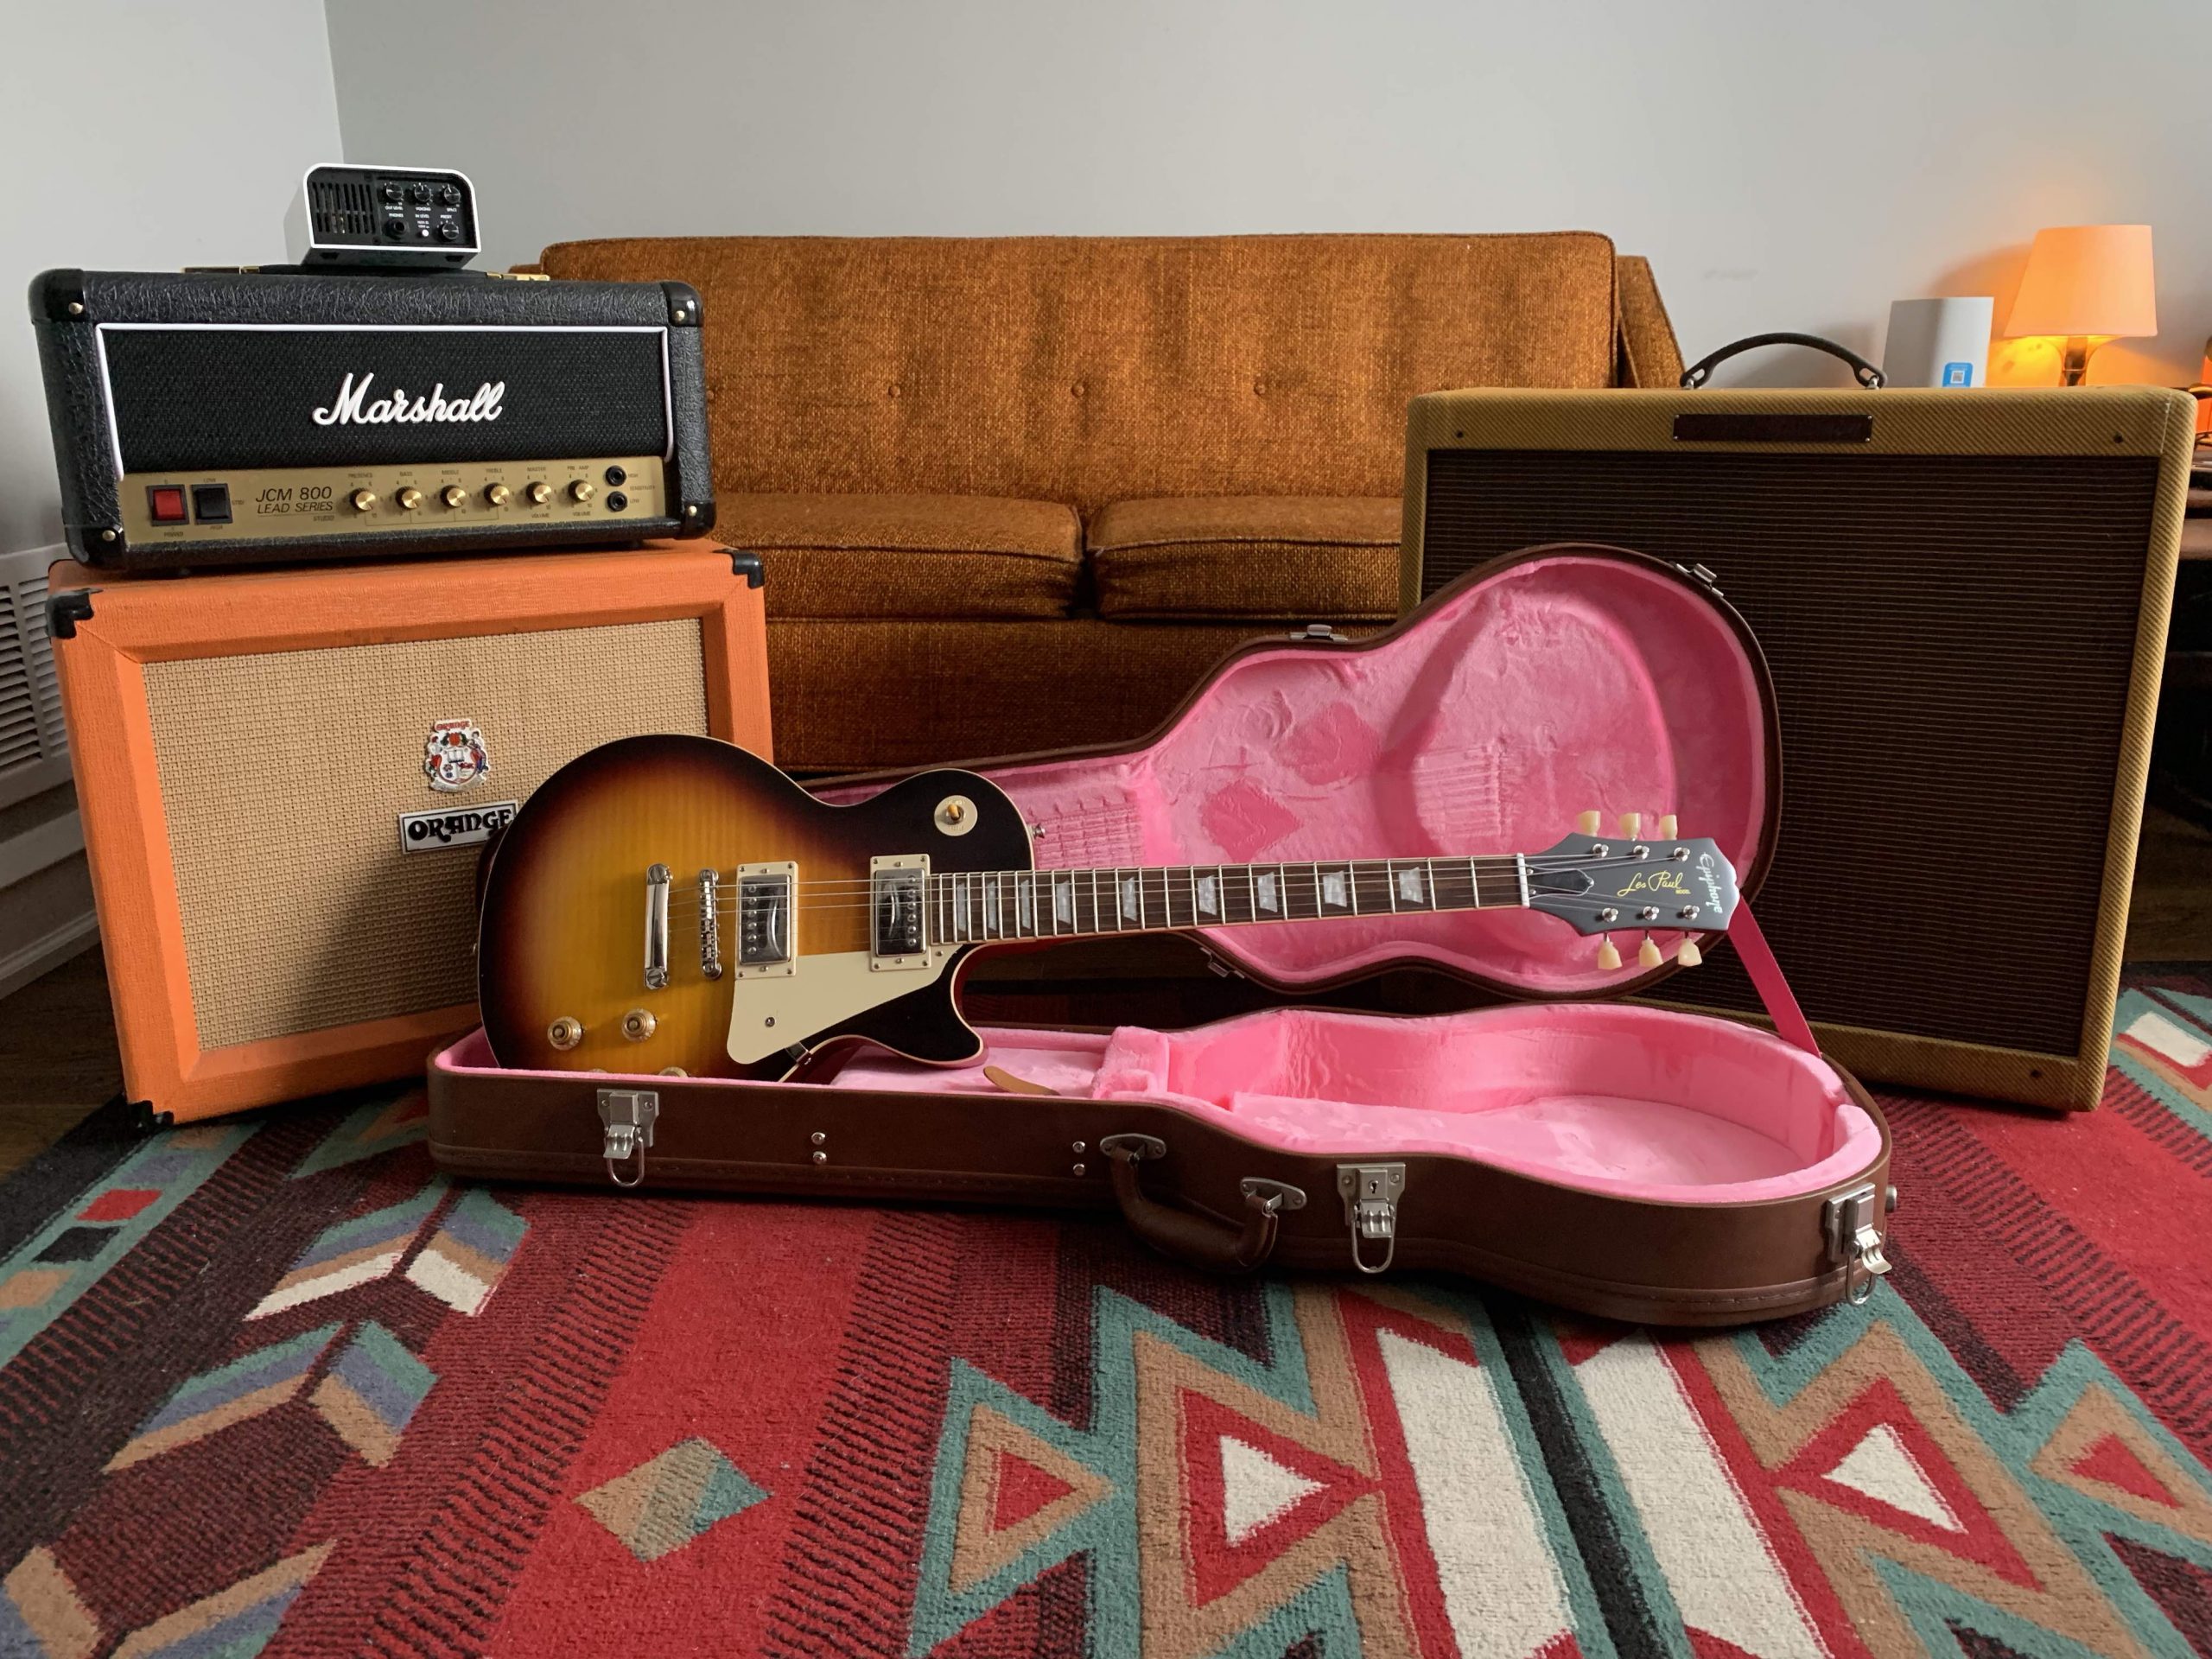 Epiphone 1959 Les Paul Standard: All the Iconic Features at a